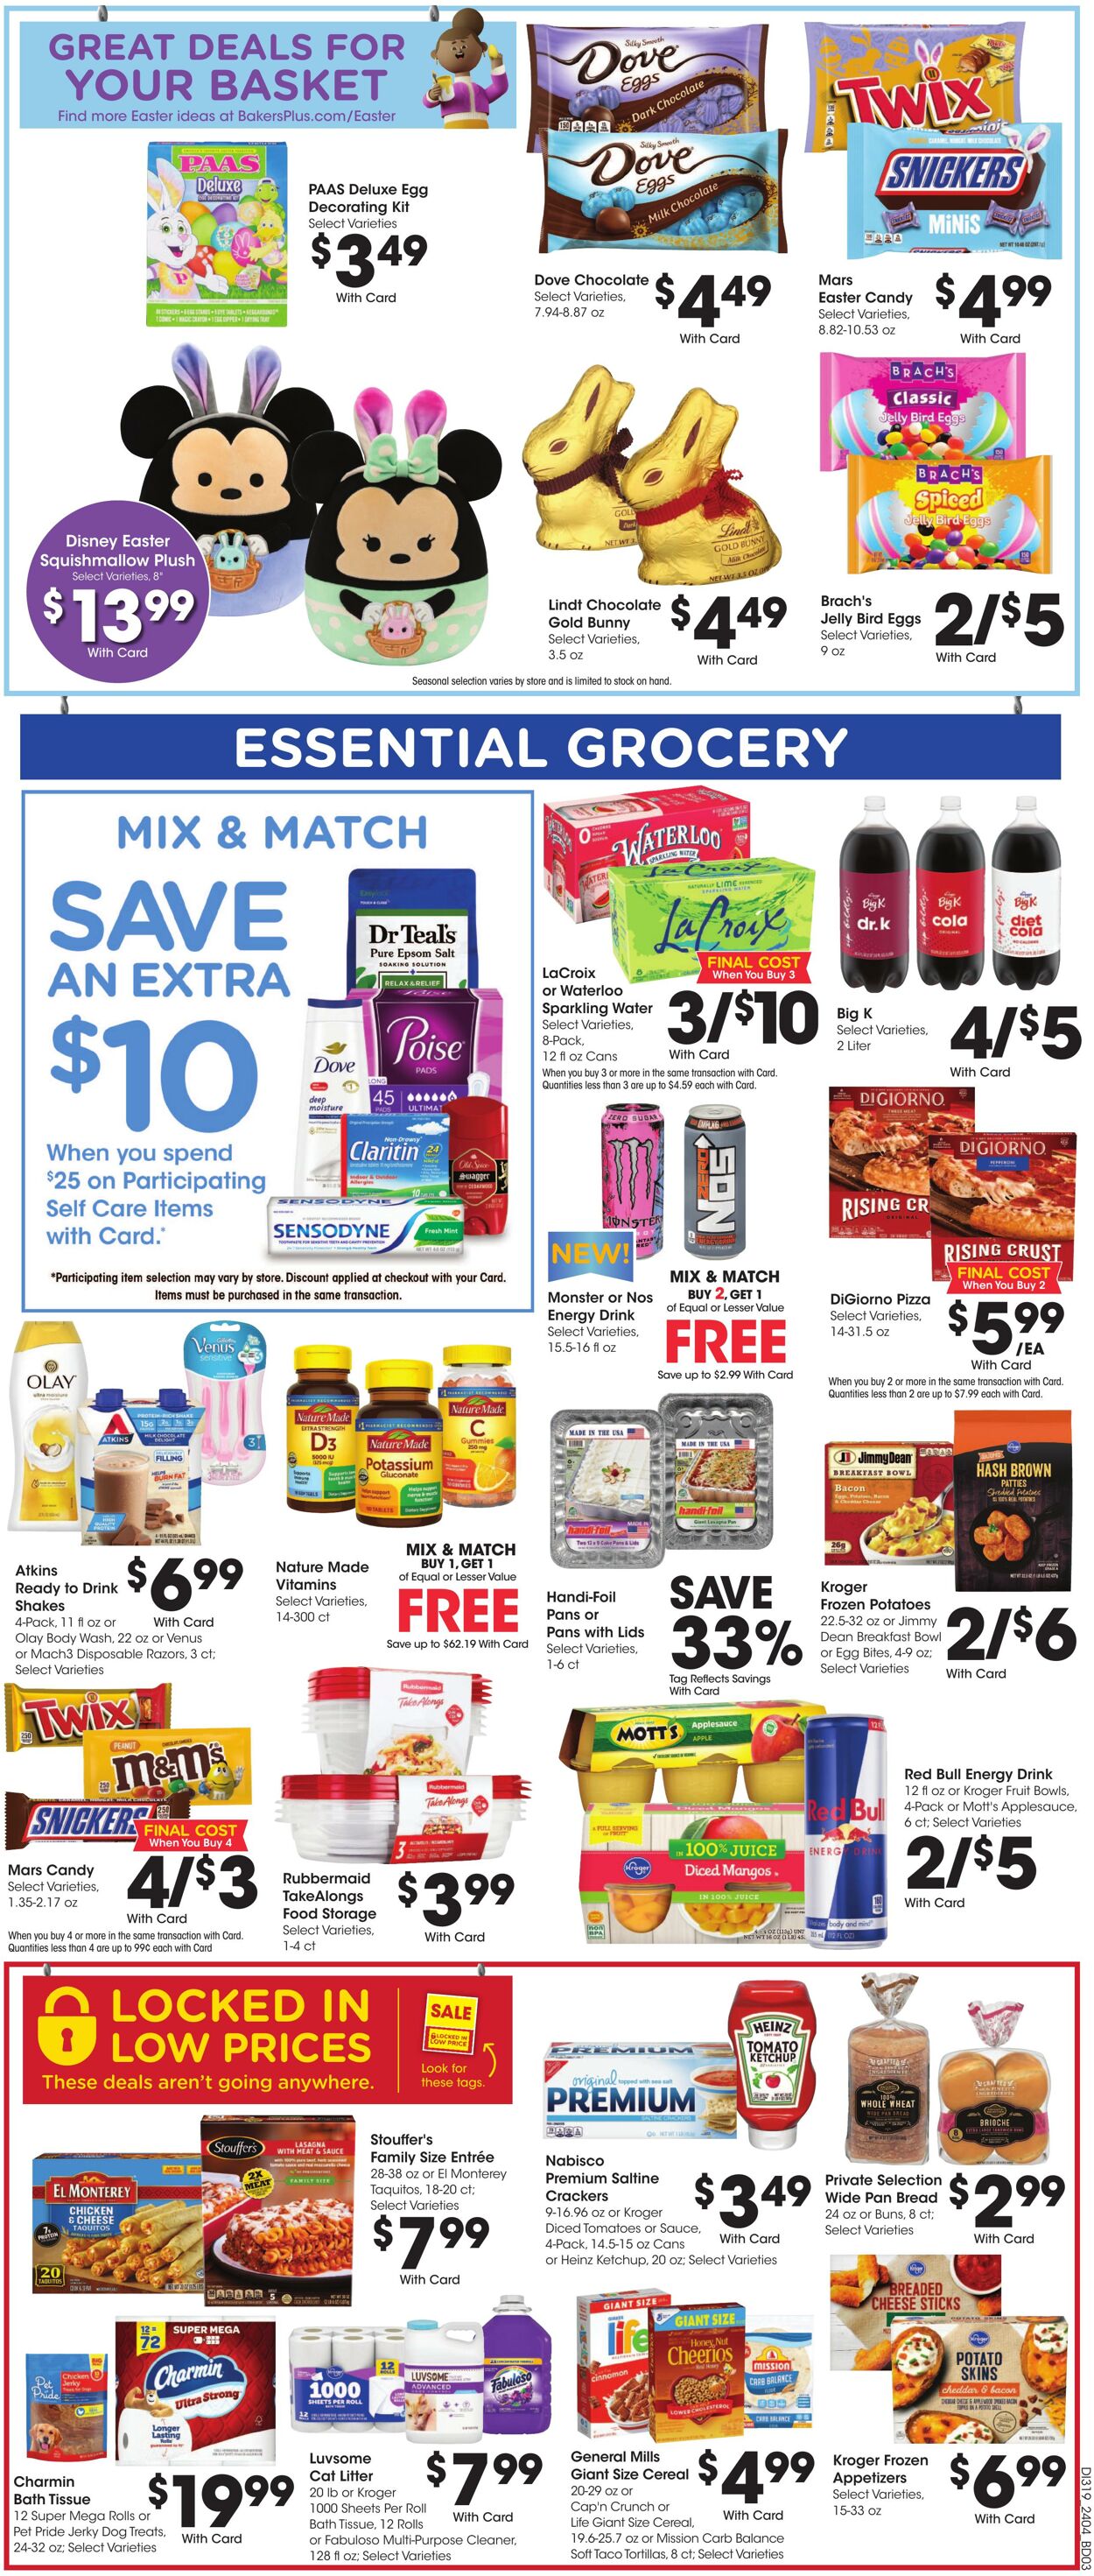 Weekly ad Baker's 02/28/2024 - 03/05/2024